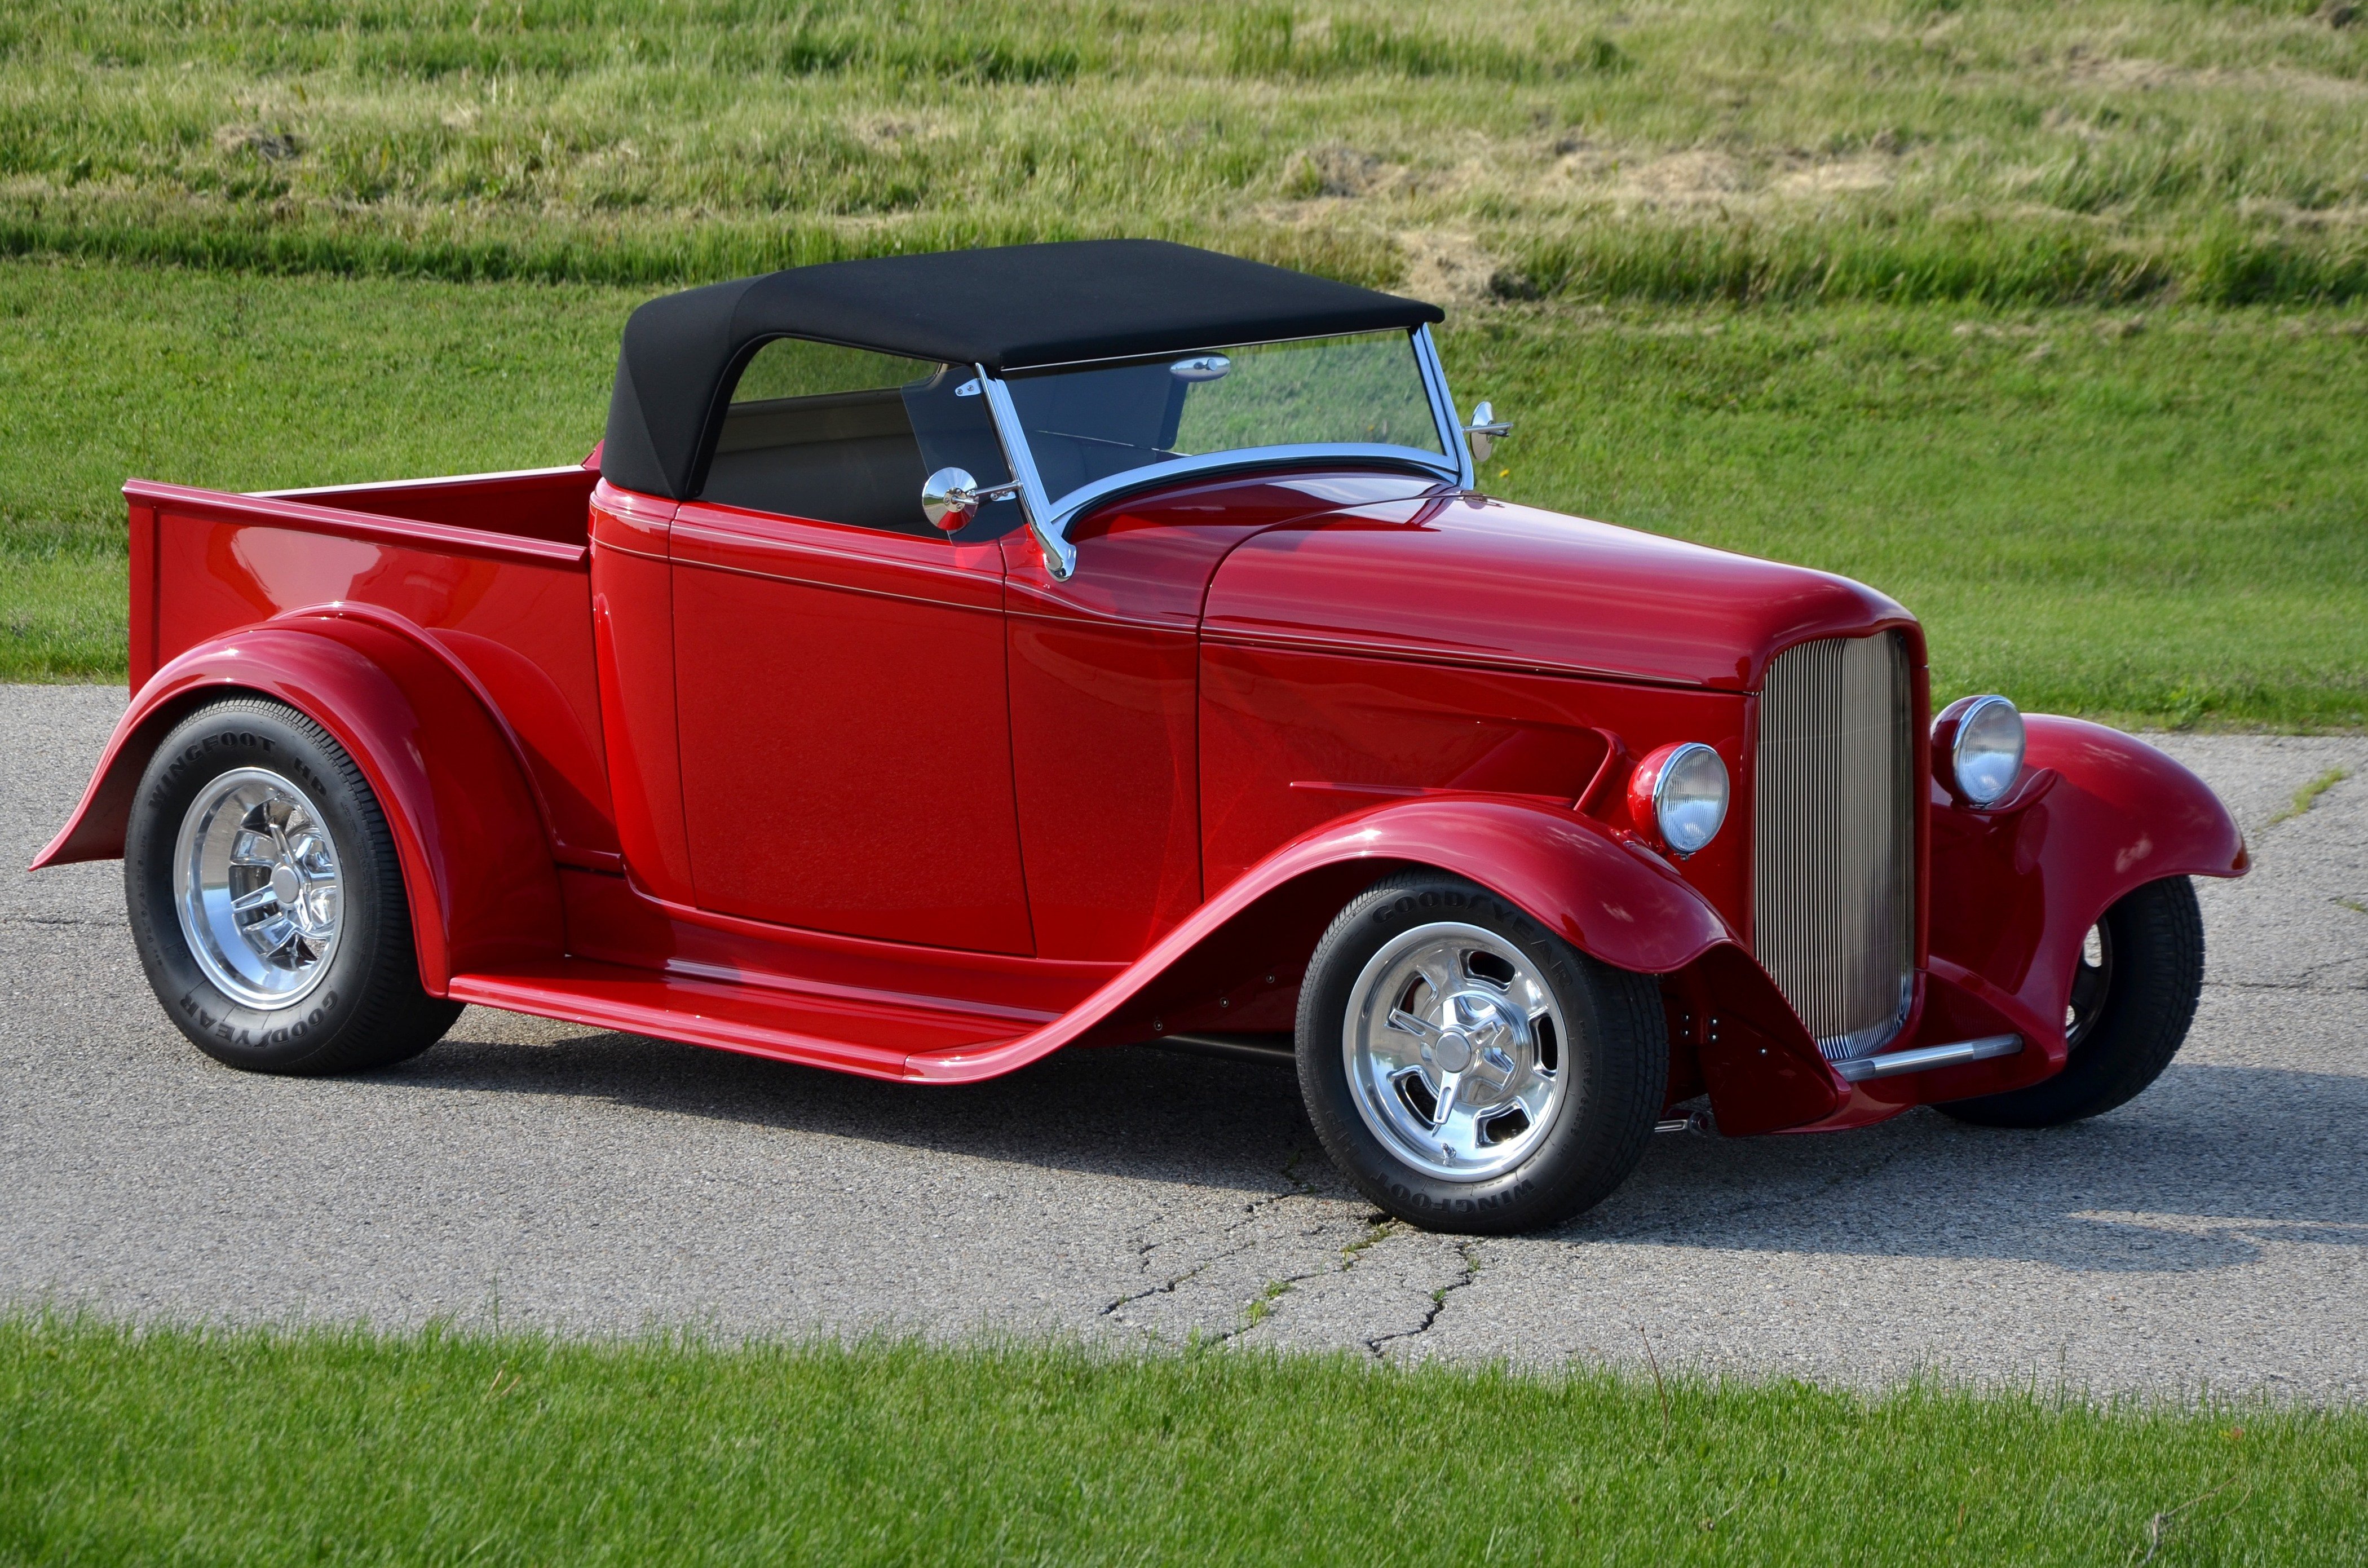 1932 Ford Pickup Truck